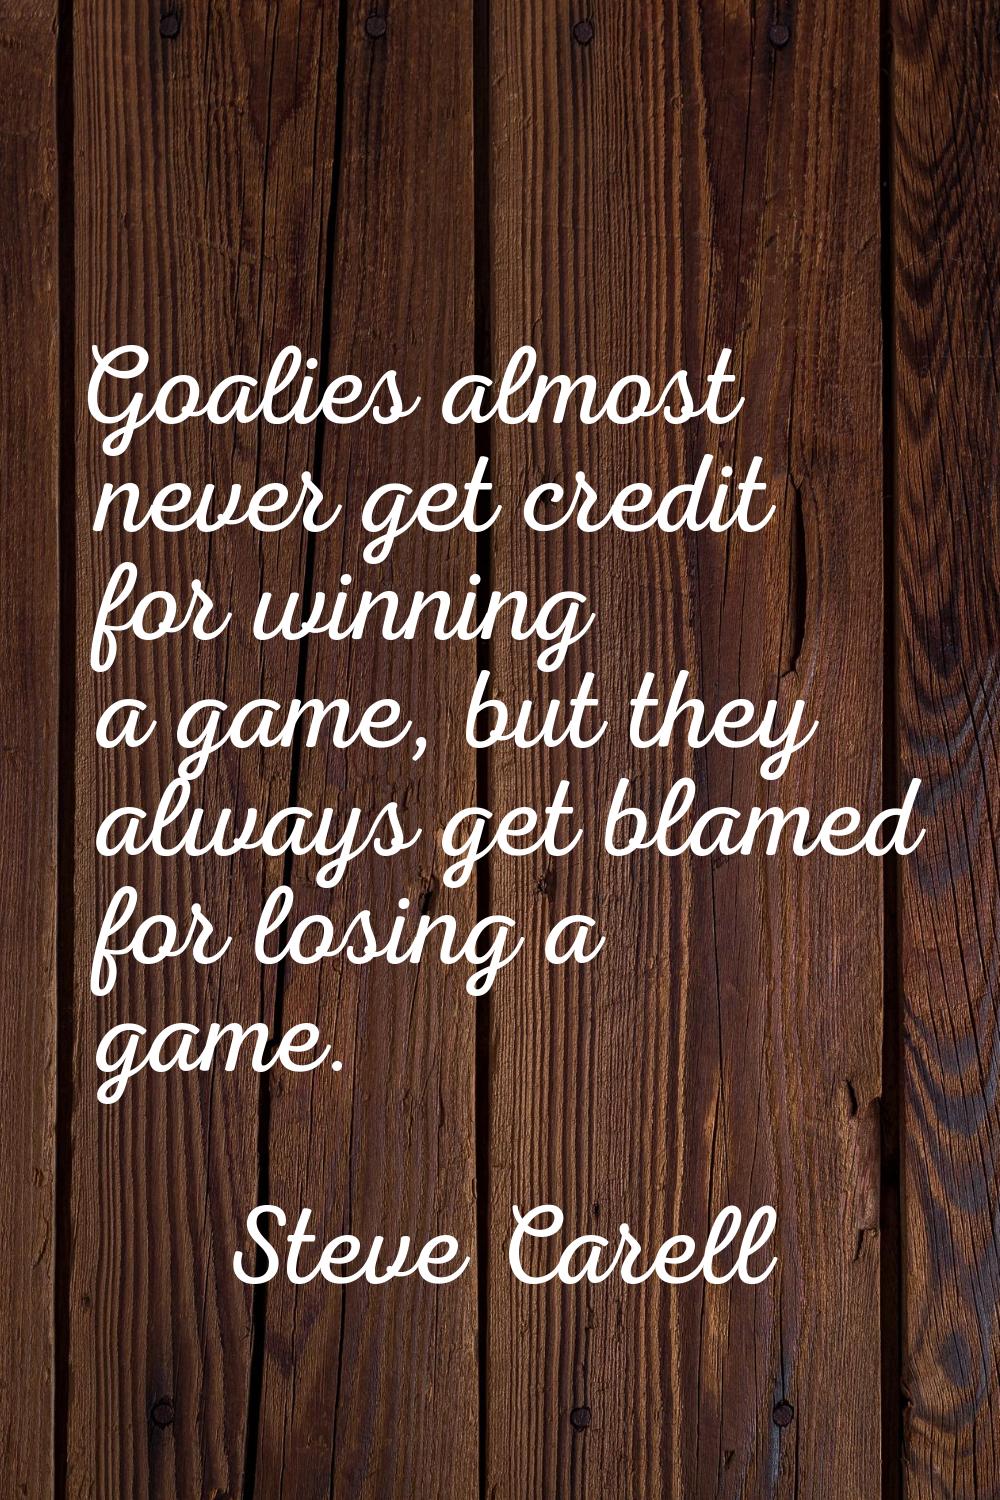 Goalies almost never get credit for winning a game, but they always get blamed for losing a game.